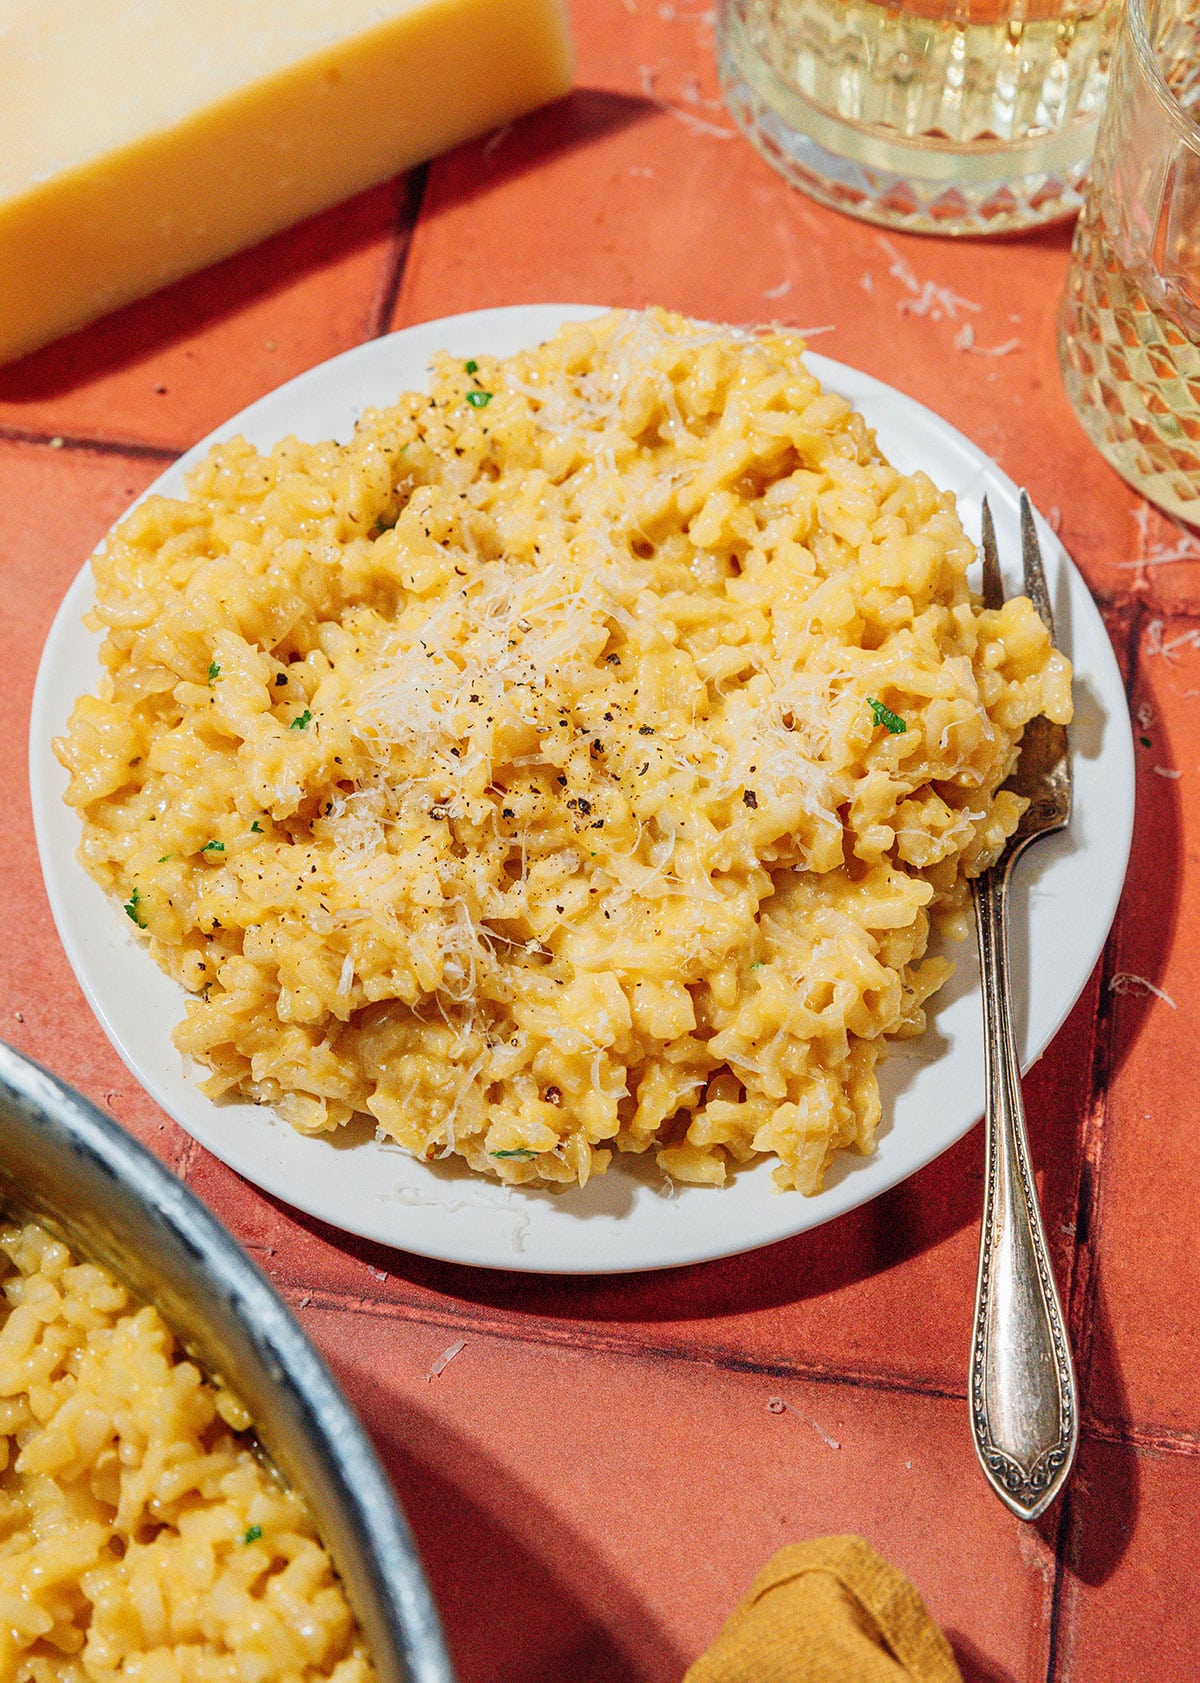 A plate of risotto on a orange background.